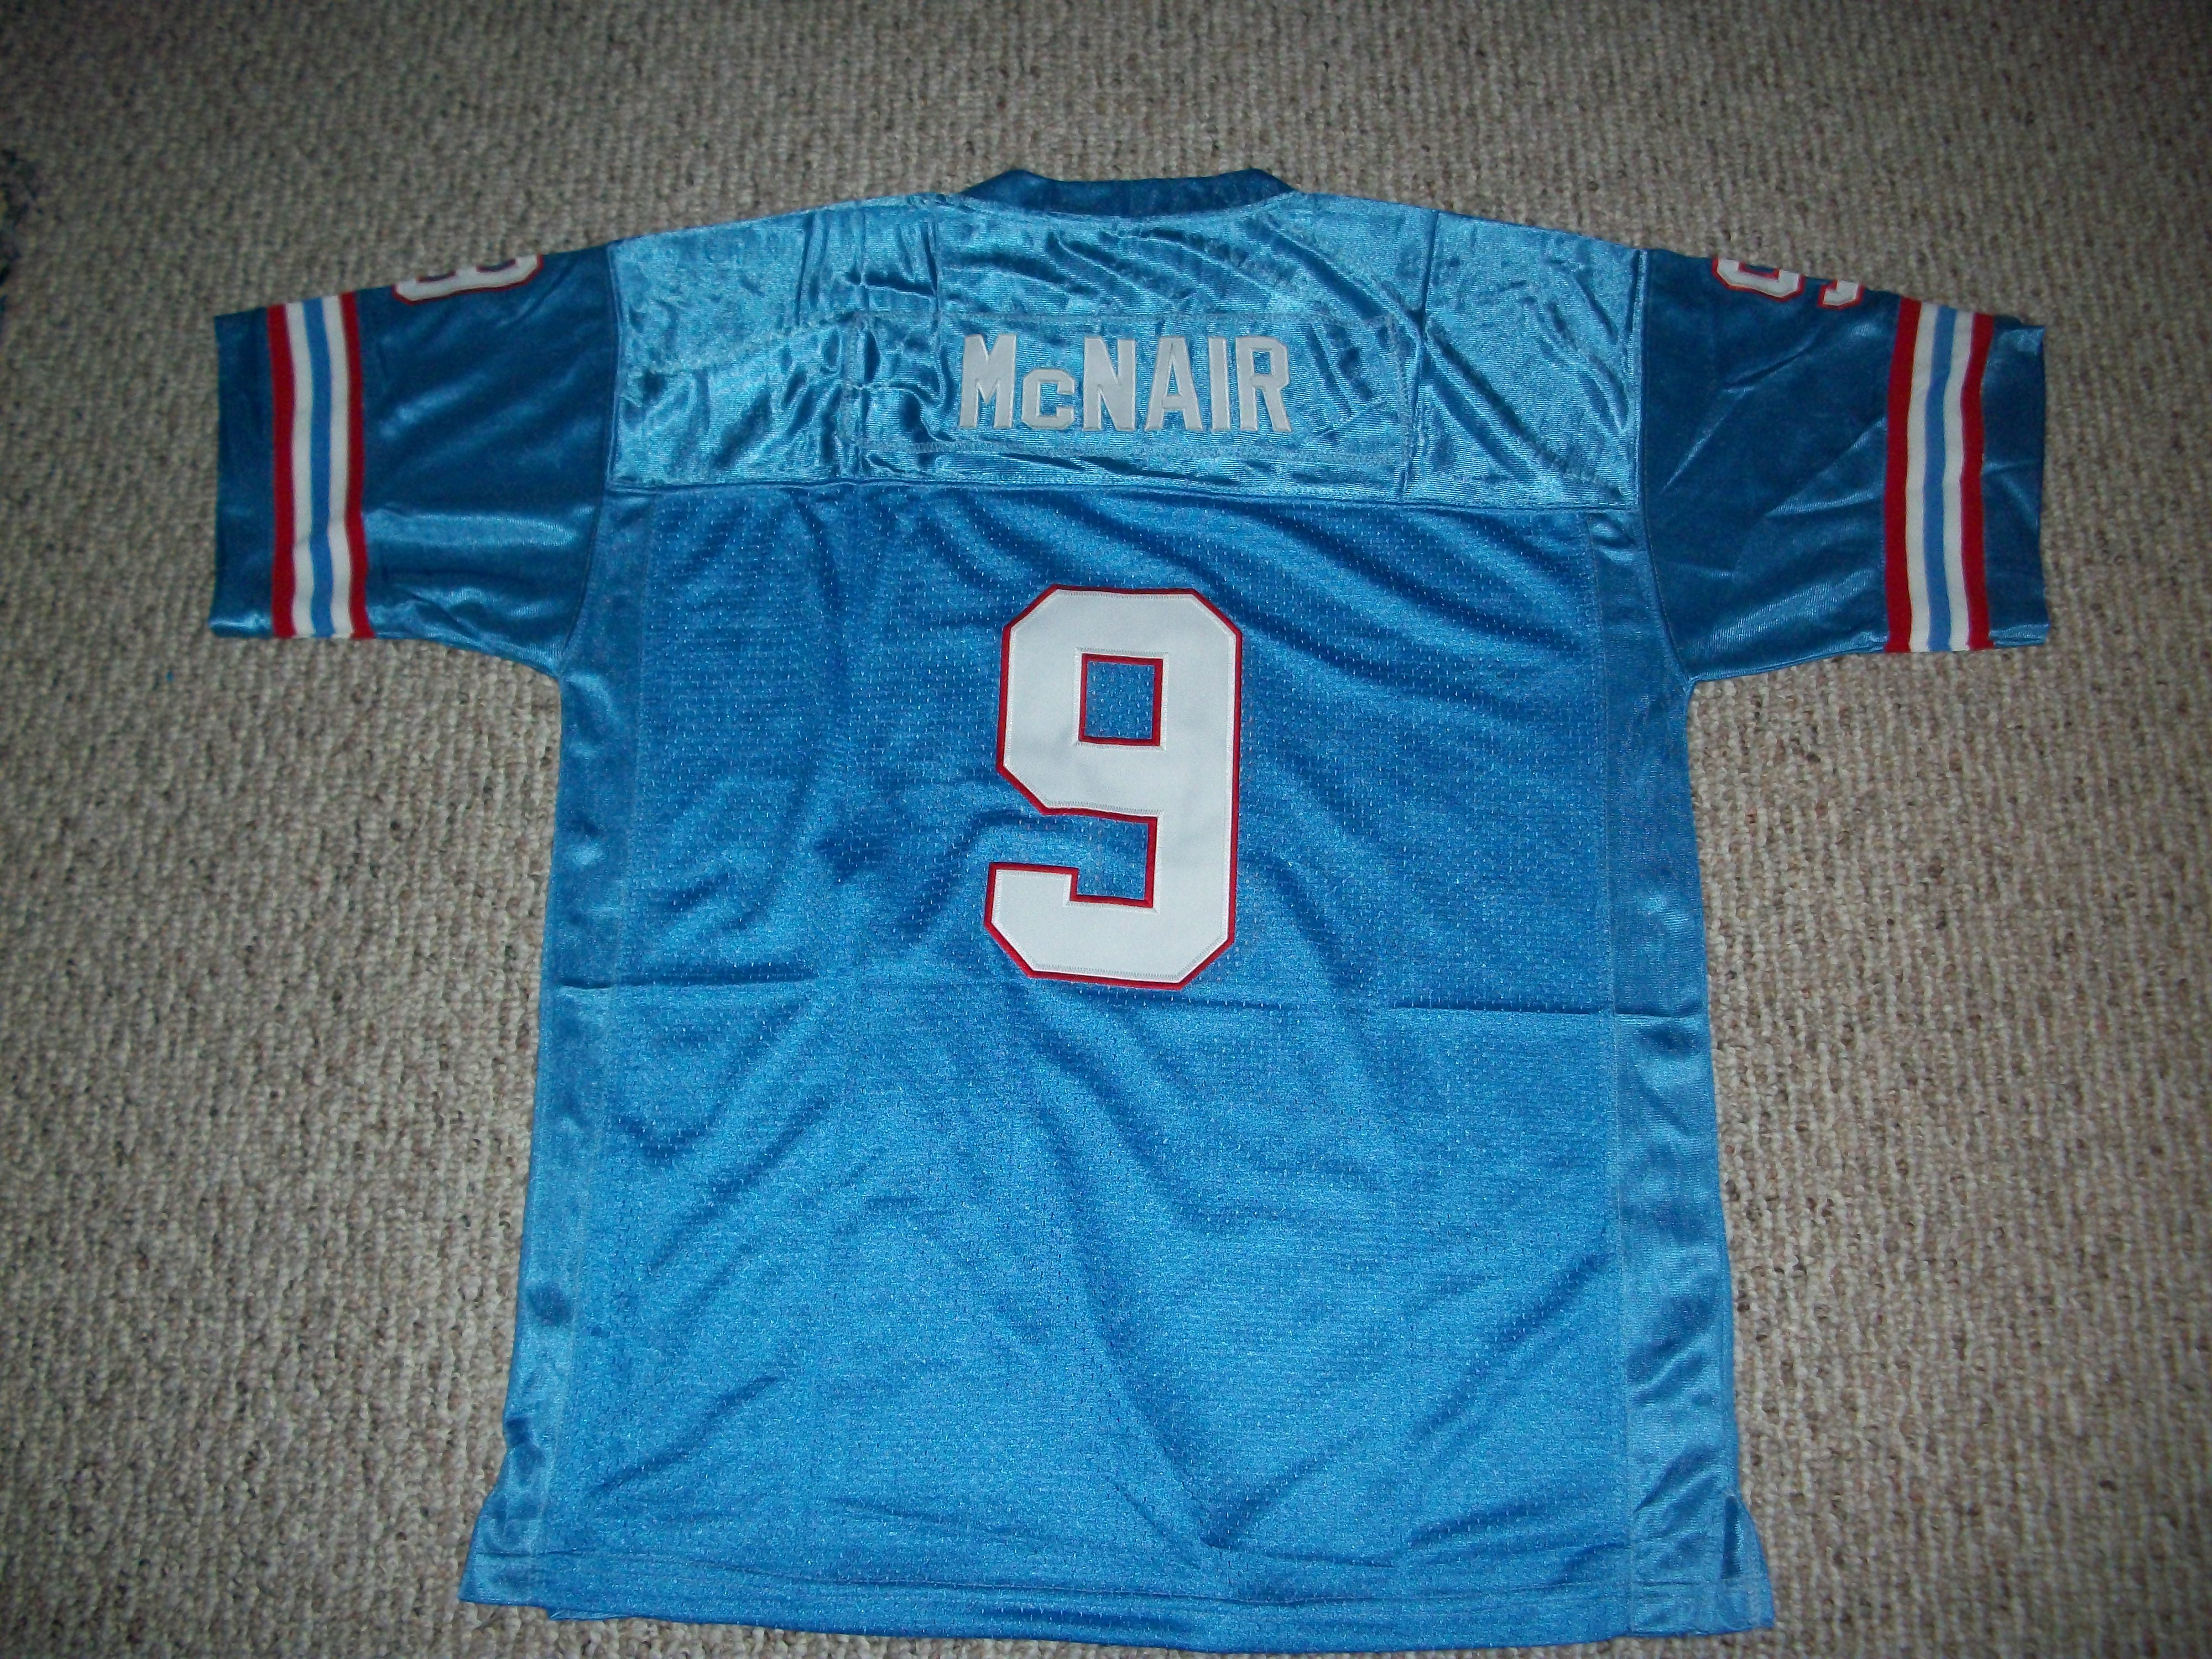 Just got in this beautiful Steve McNair jersey from Mitchell